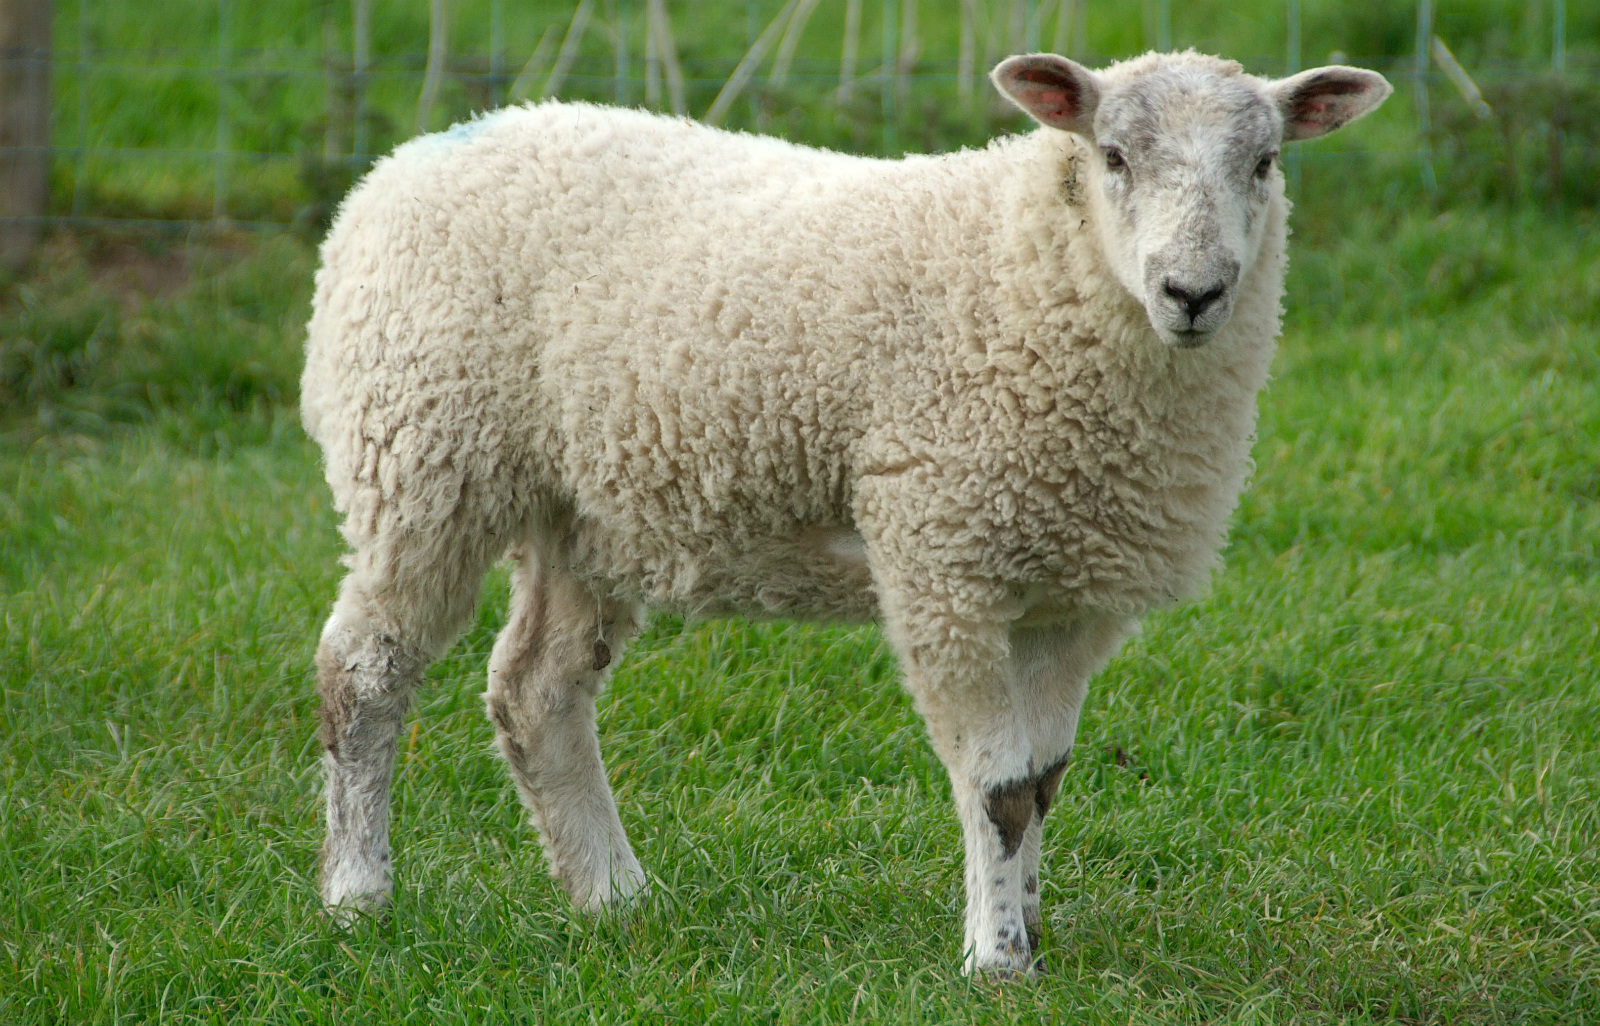 https://static.wikia.nocookie.net/animals/images/b/ba/Sheep.jpg/revision/latest?cb=20190209033122